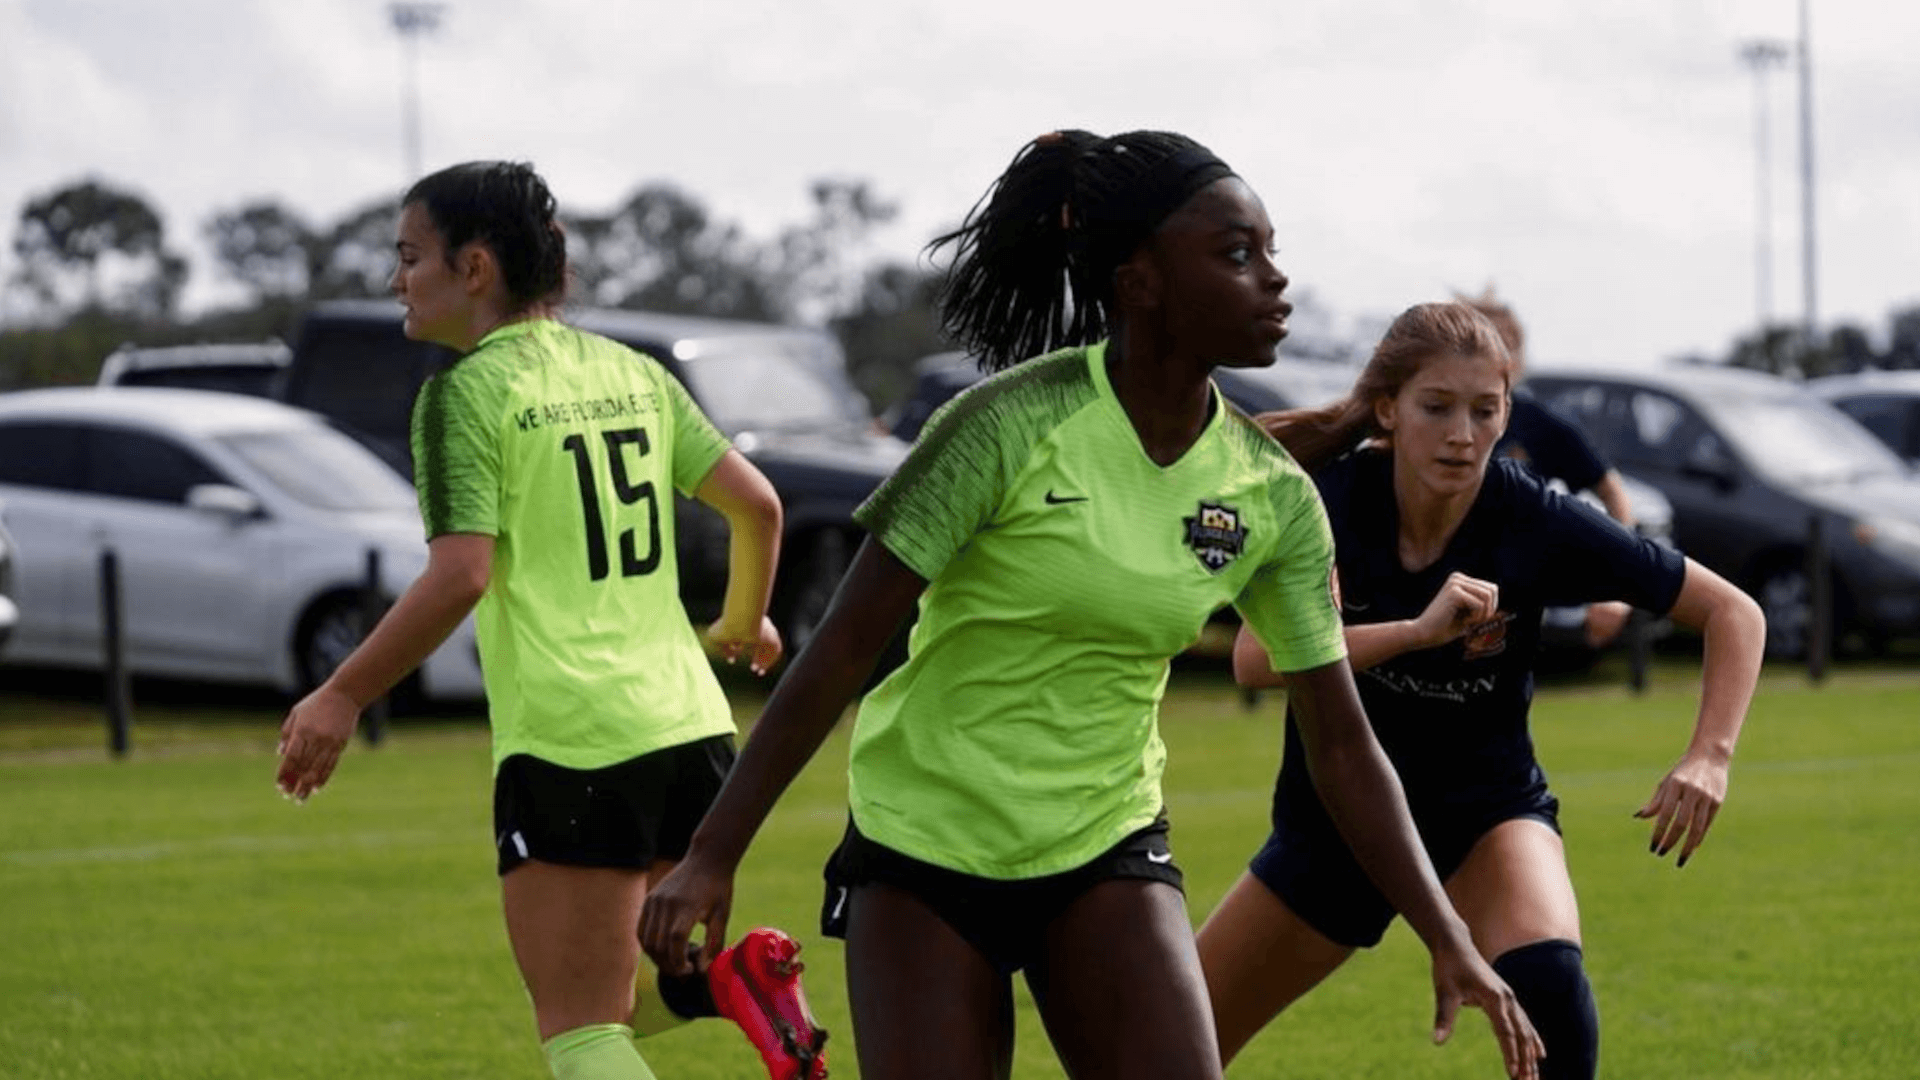 youth spring soccer 2021 ecnl girl's player